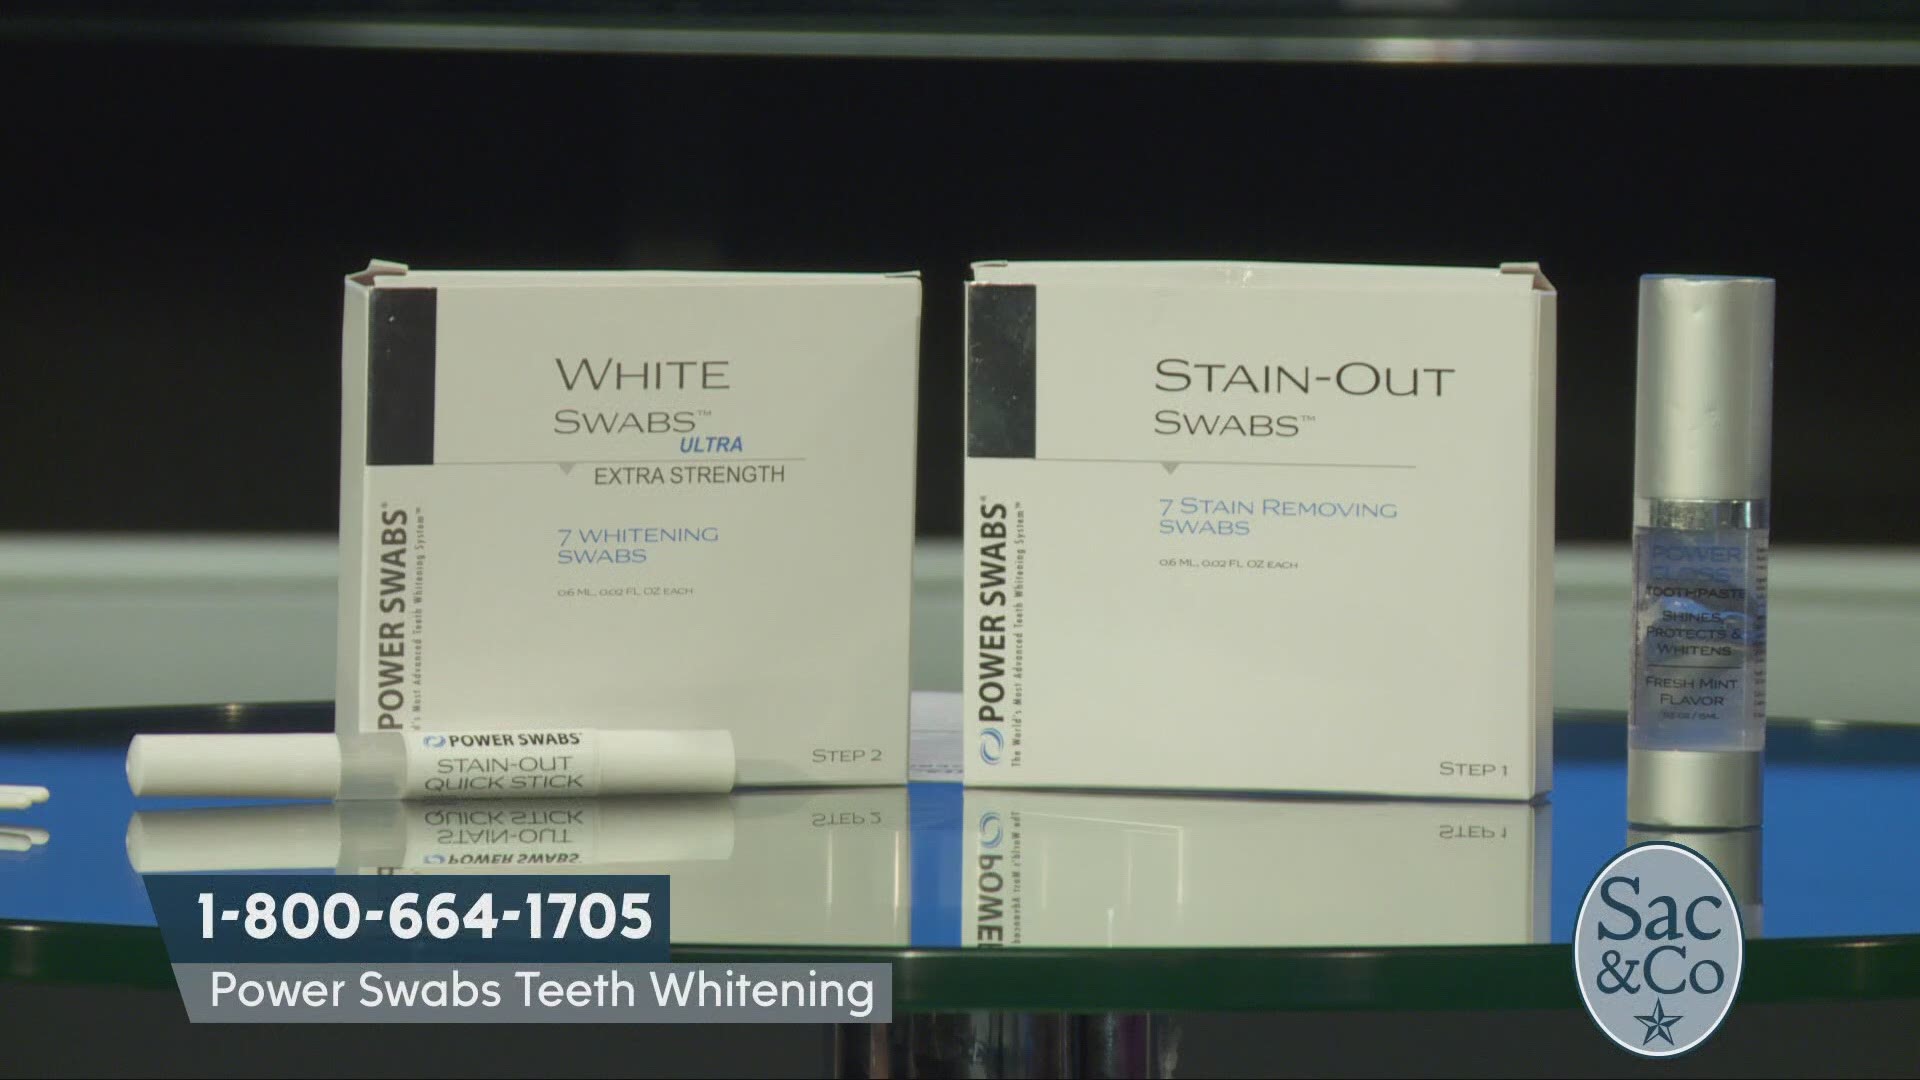 Learn how to whiten your teeth without using messy strips or annoying trays! The following is a paid segment sponsored by True Earth Health Solutions.